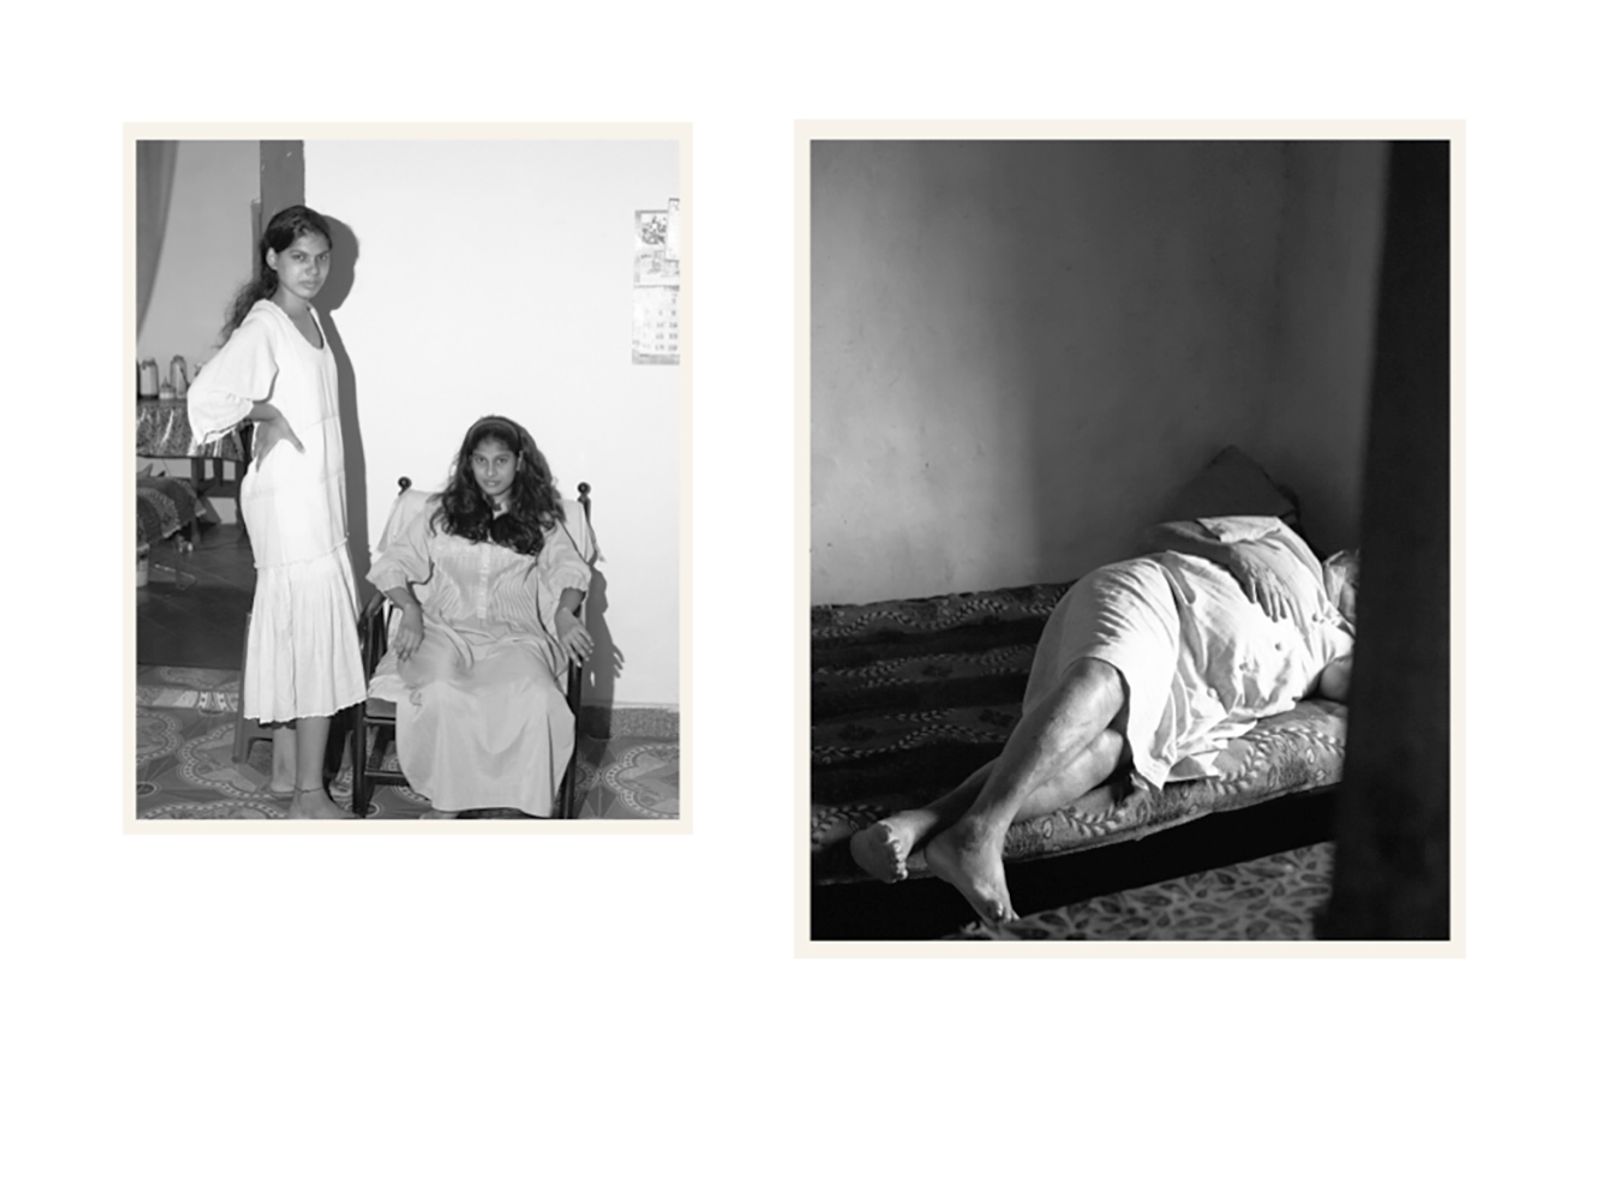 © Pretika Menon - Image from the Ave Maria photography project